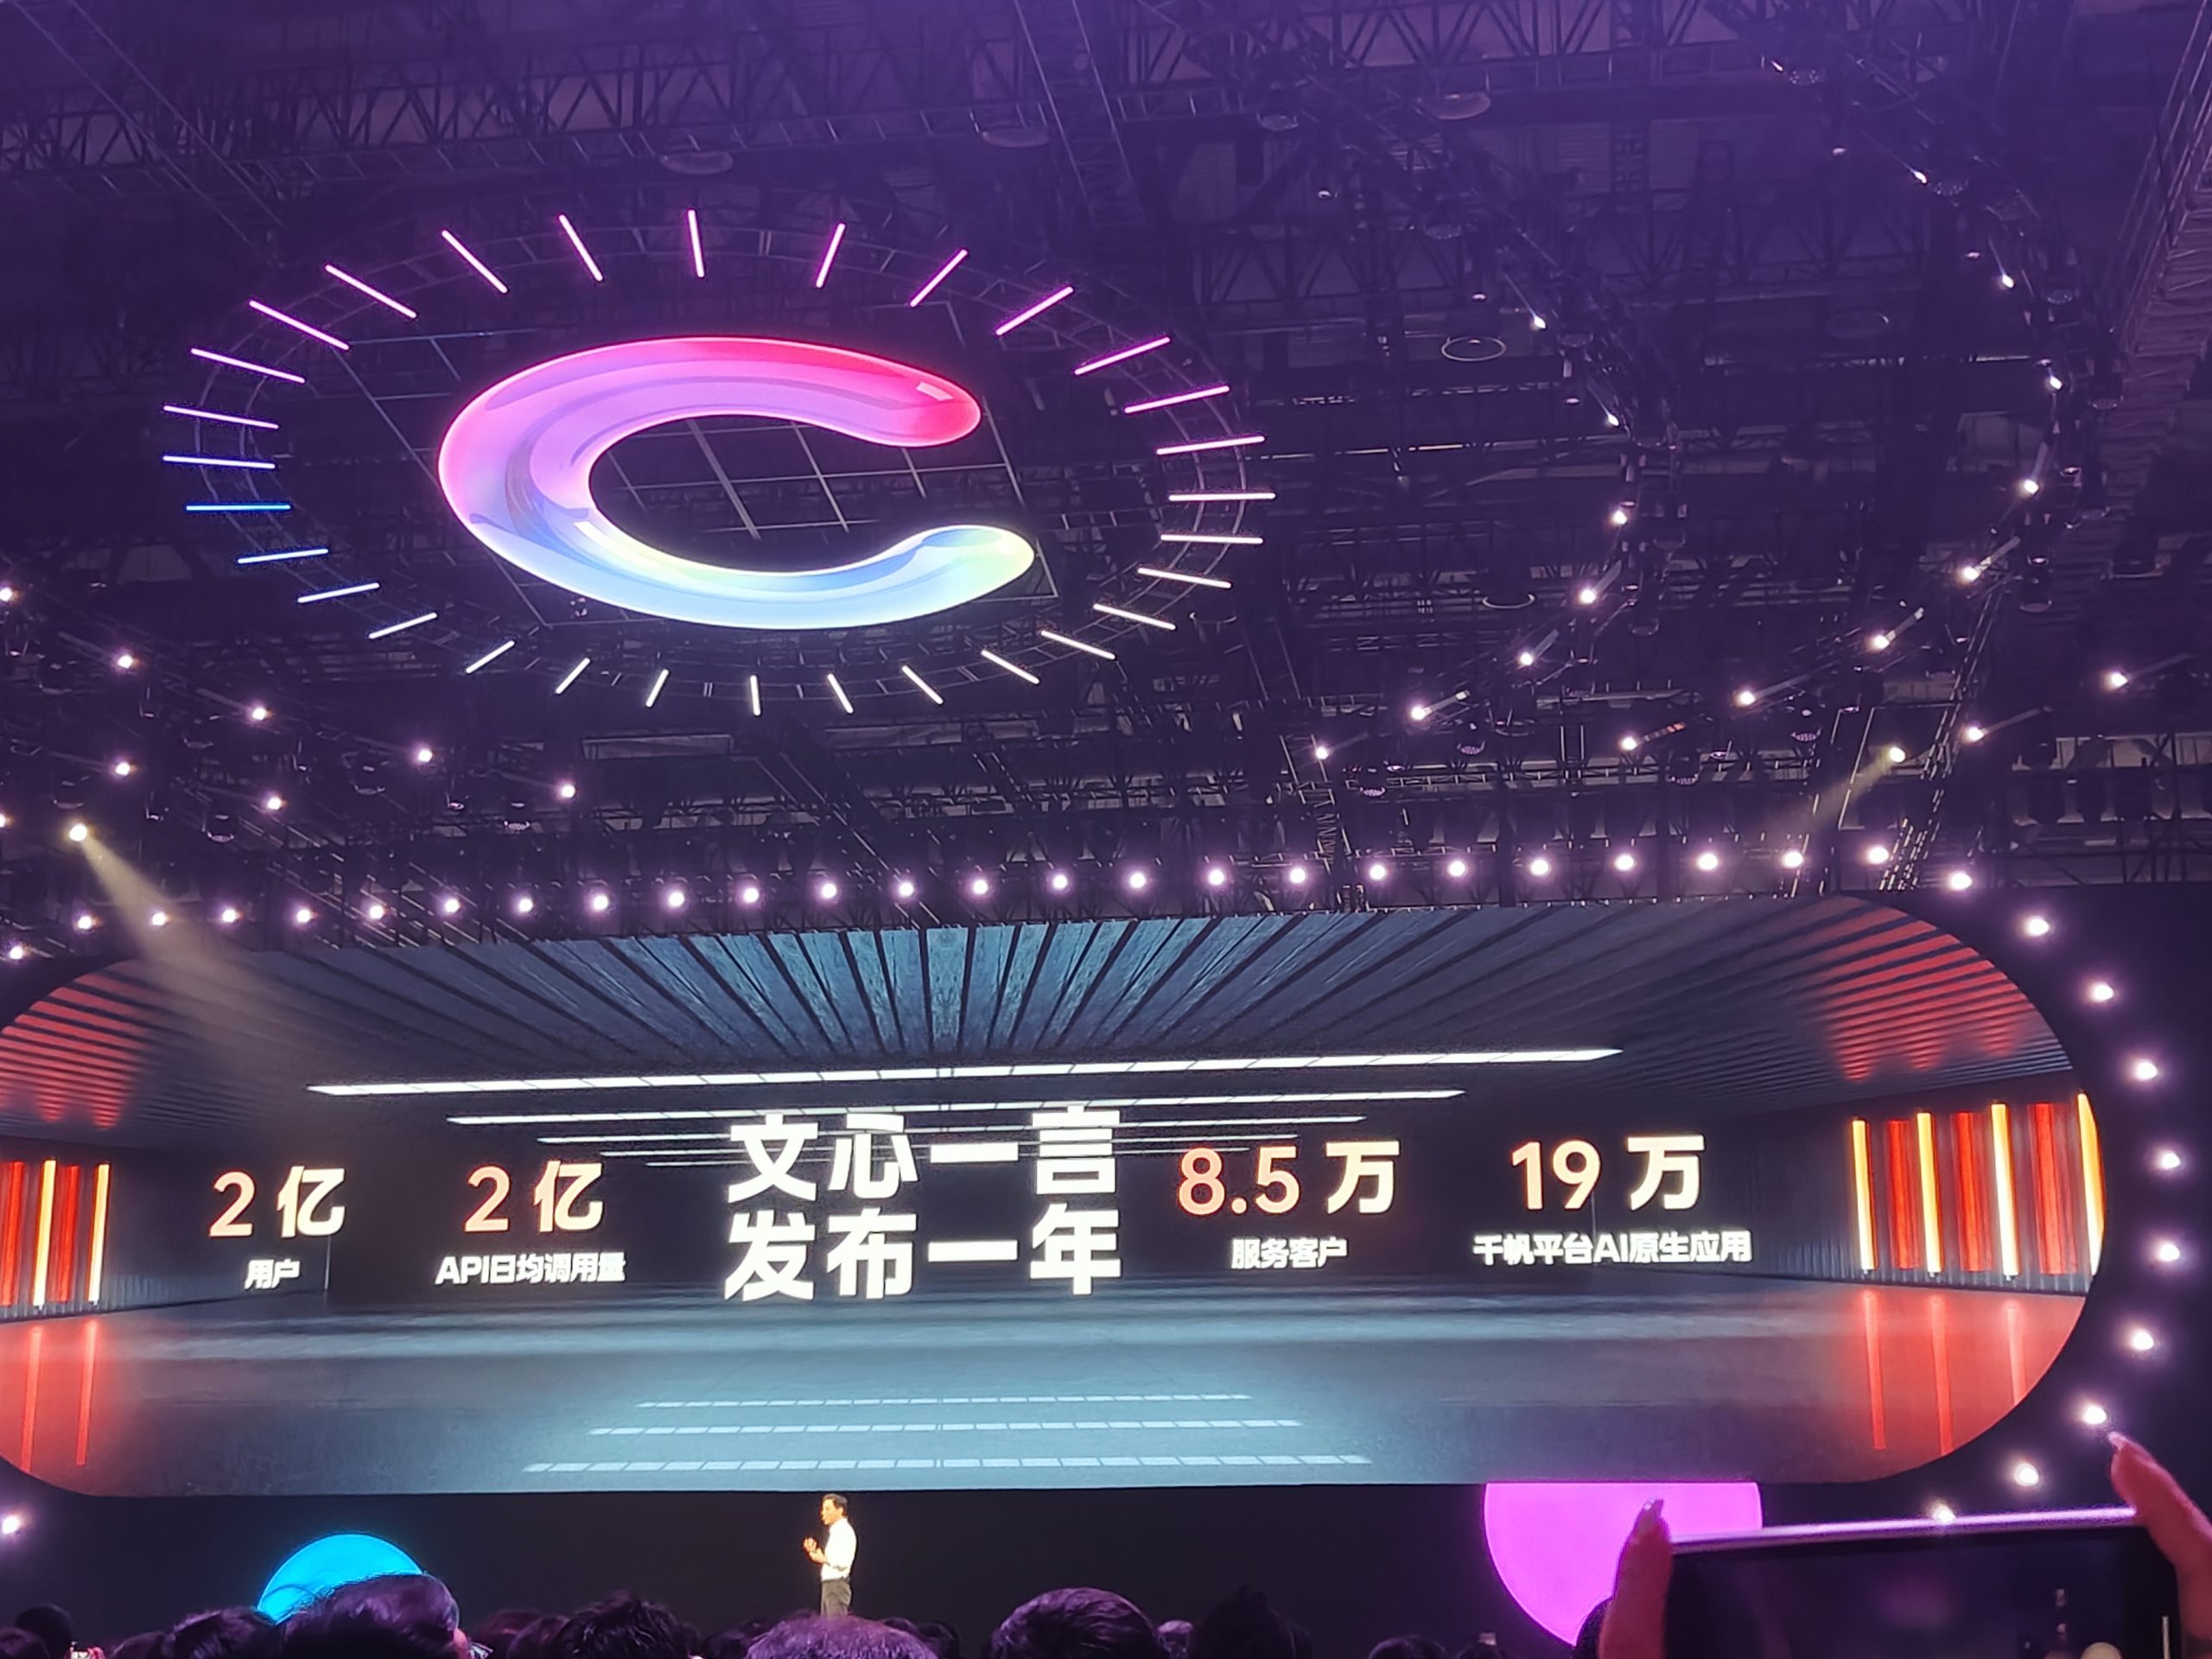 Robin Li said that 27% of Baidu’s daily new codes are generated by AI